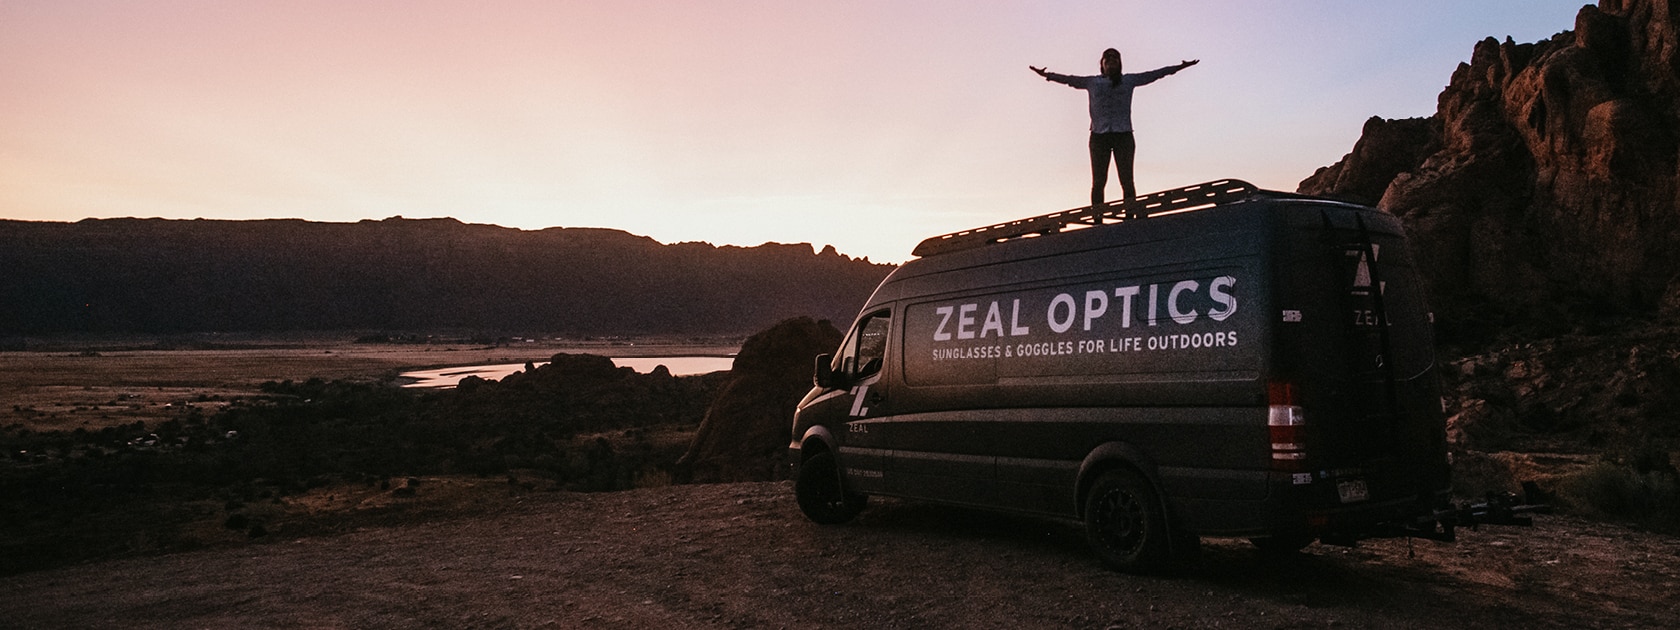 a person standing on top of a Zeal Optics van near a rocky landscape